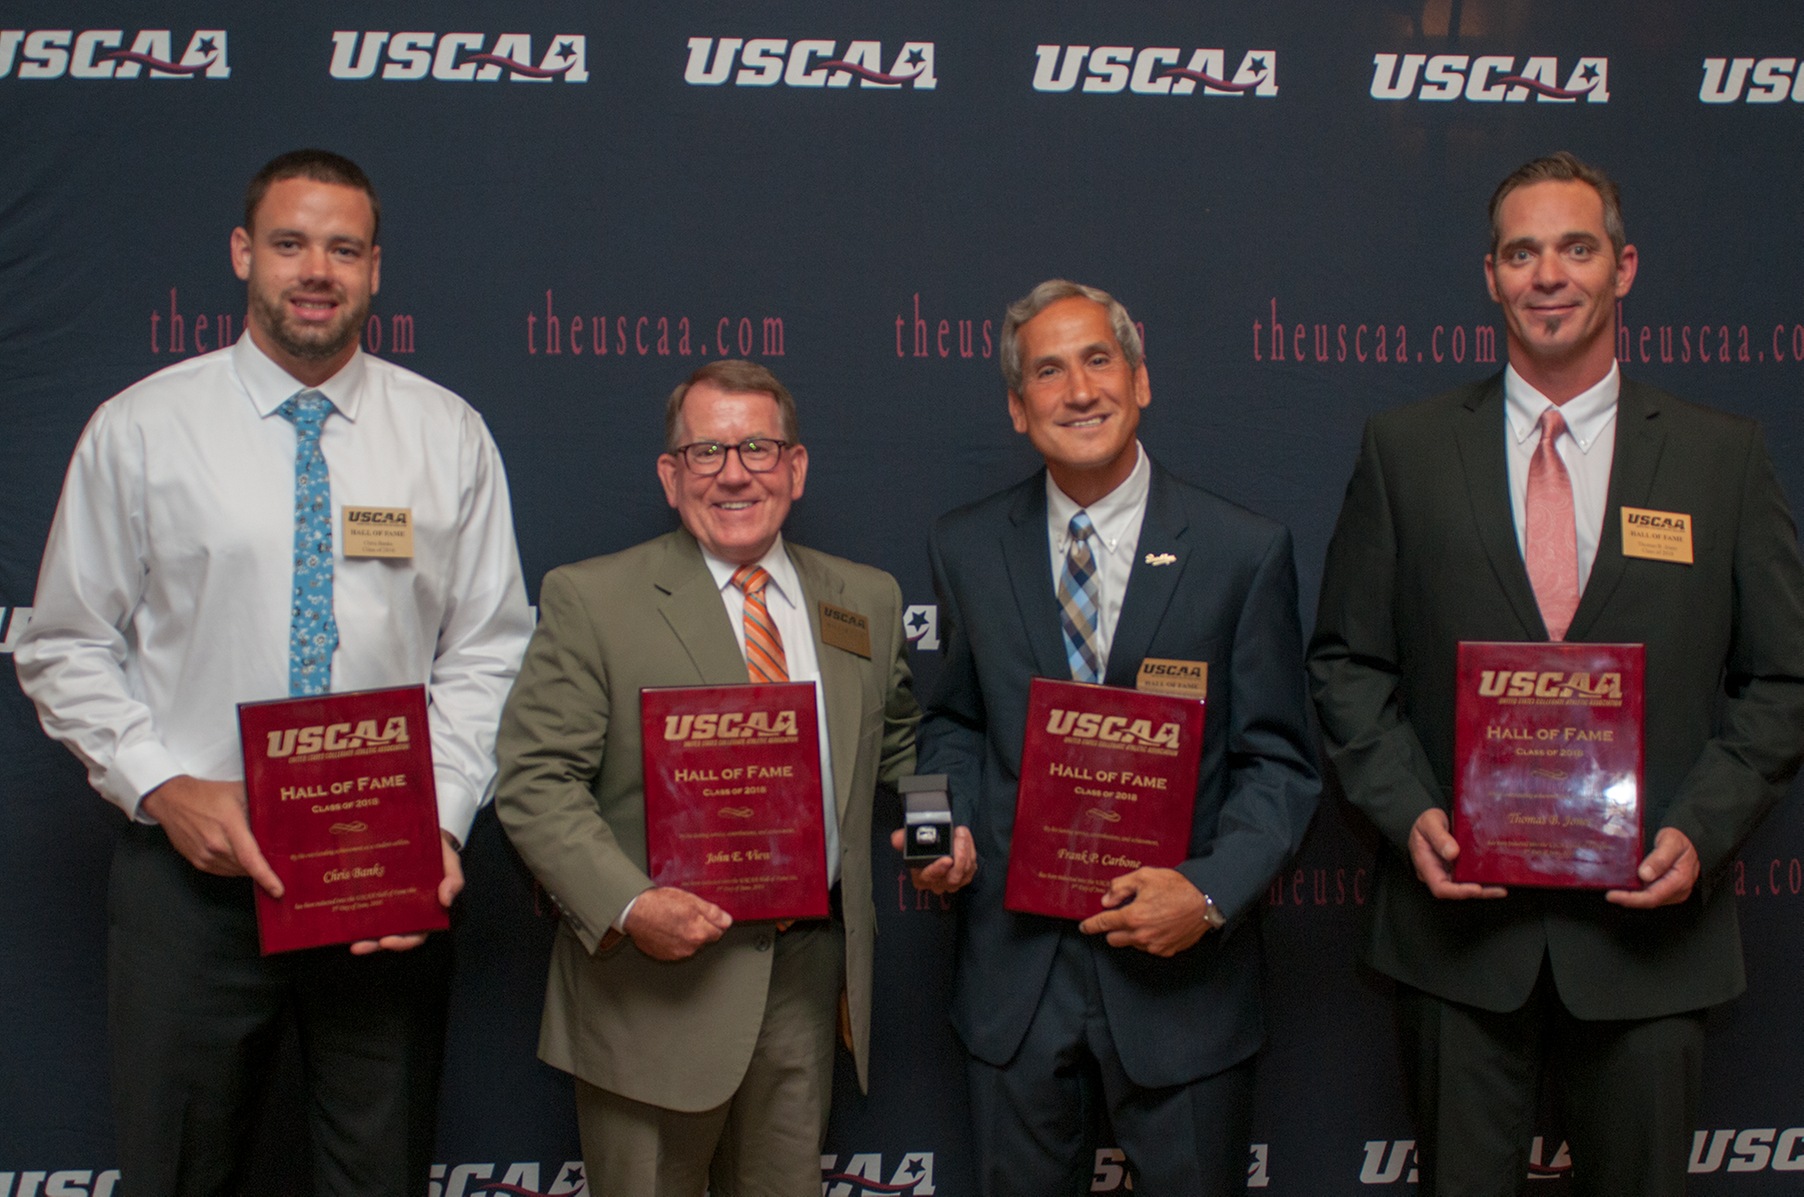 Former HVIAC Coaches Frank P. Carbone and John View Inducted into USCAA Hall of Fame